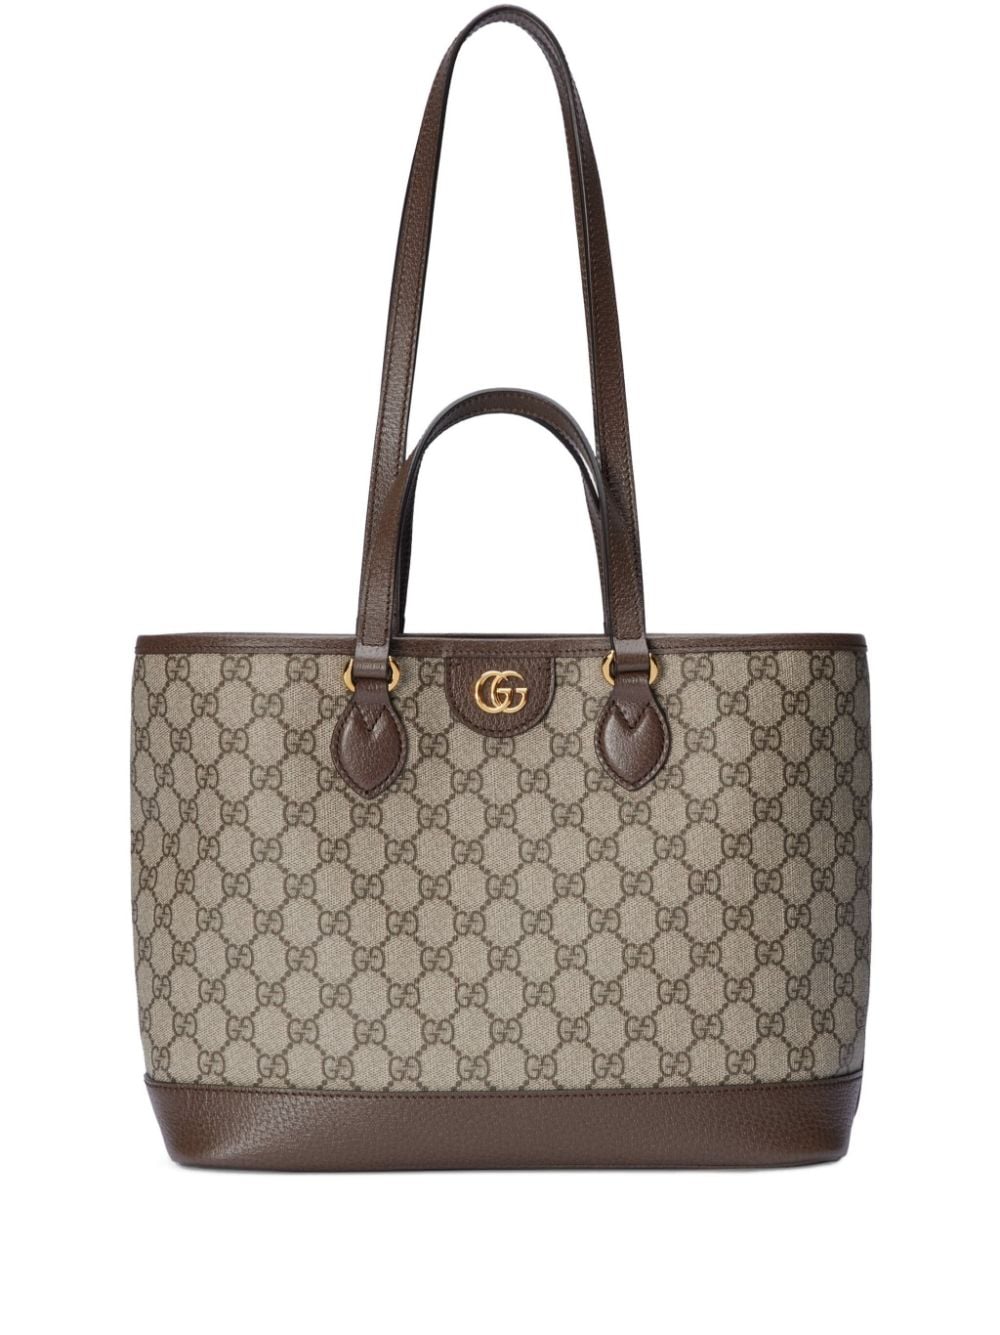 GUCCI Elegant Mini Tan Shopping Handbag with Gold-Tone Accents and Brown Leather Trim, 31x25x13 cm